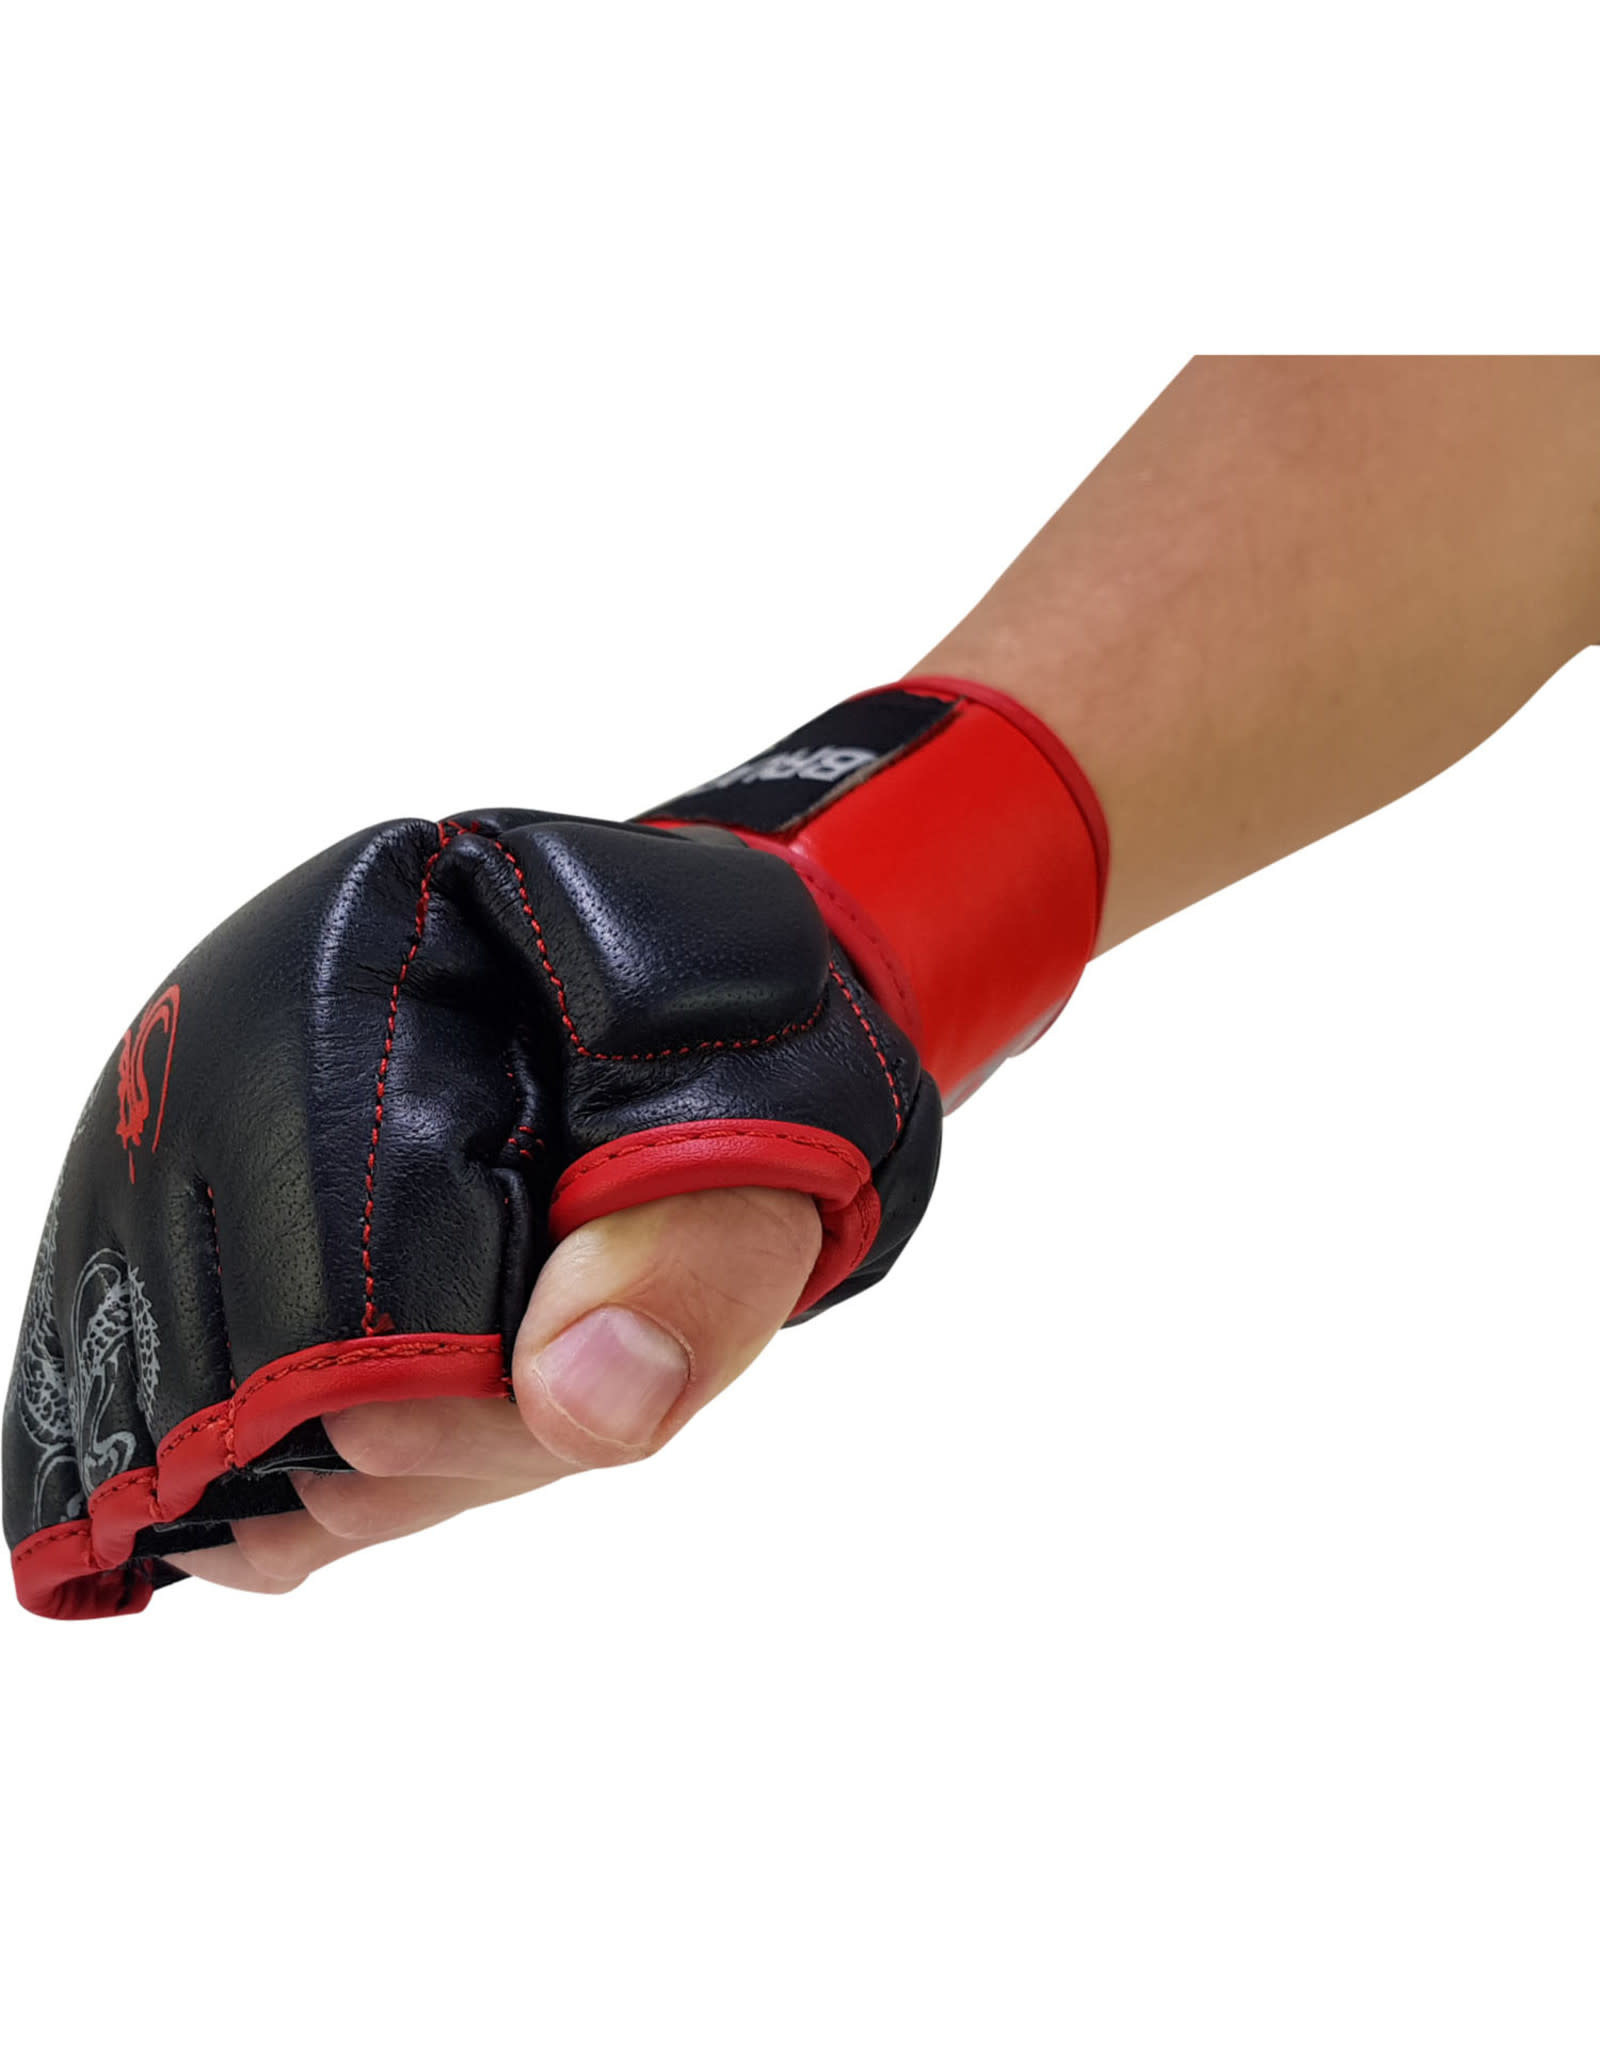 Bruce Lee Dragon Grapping Gloves